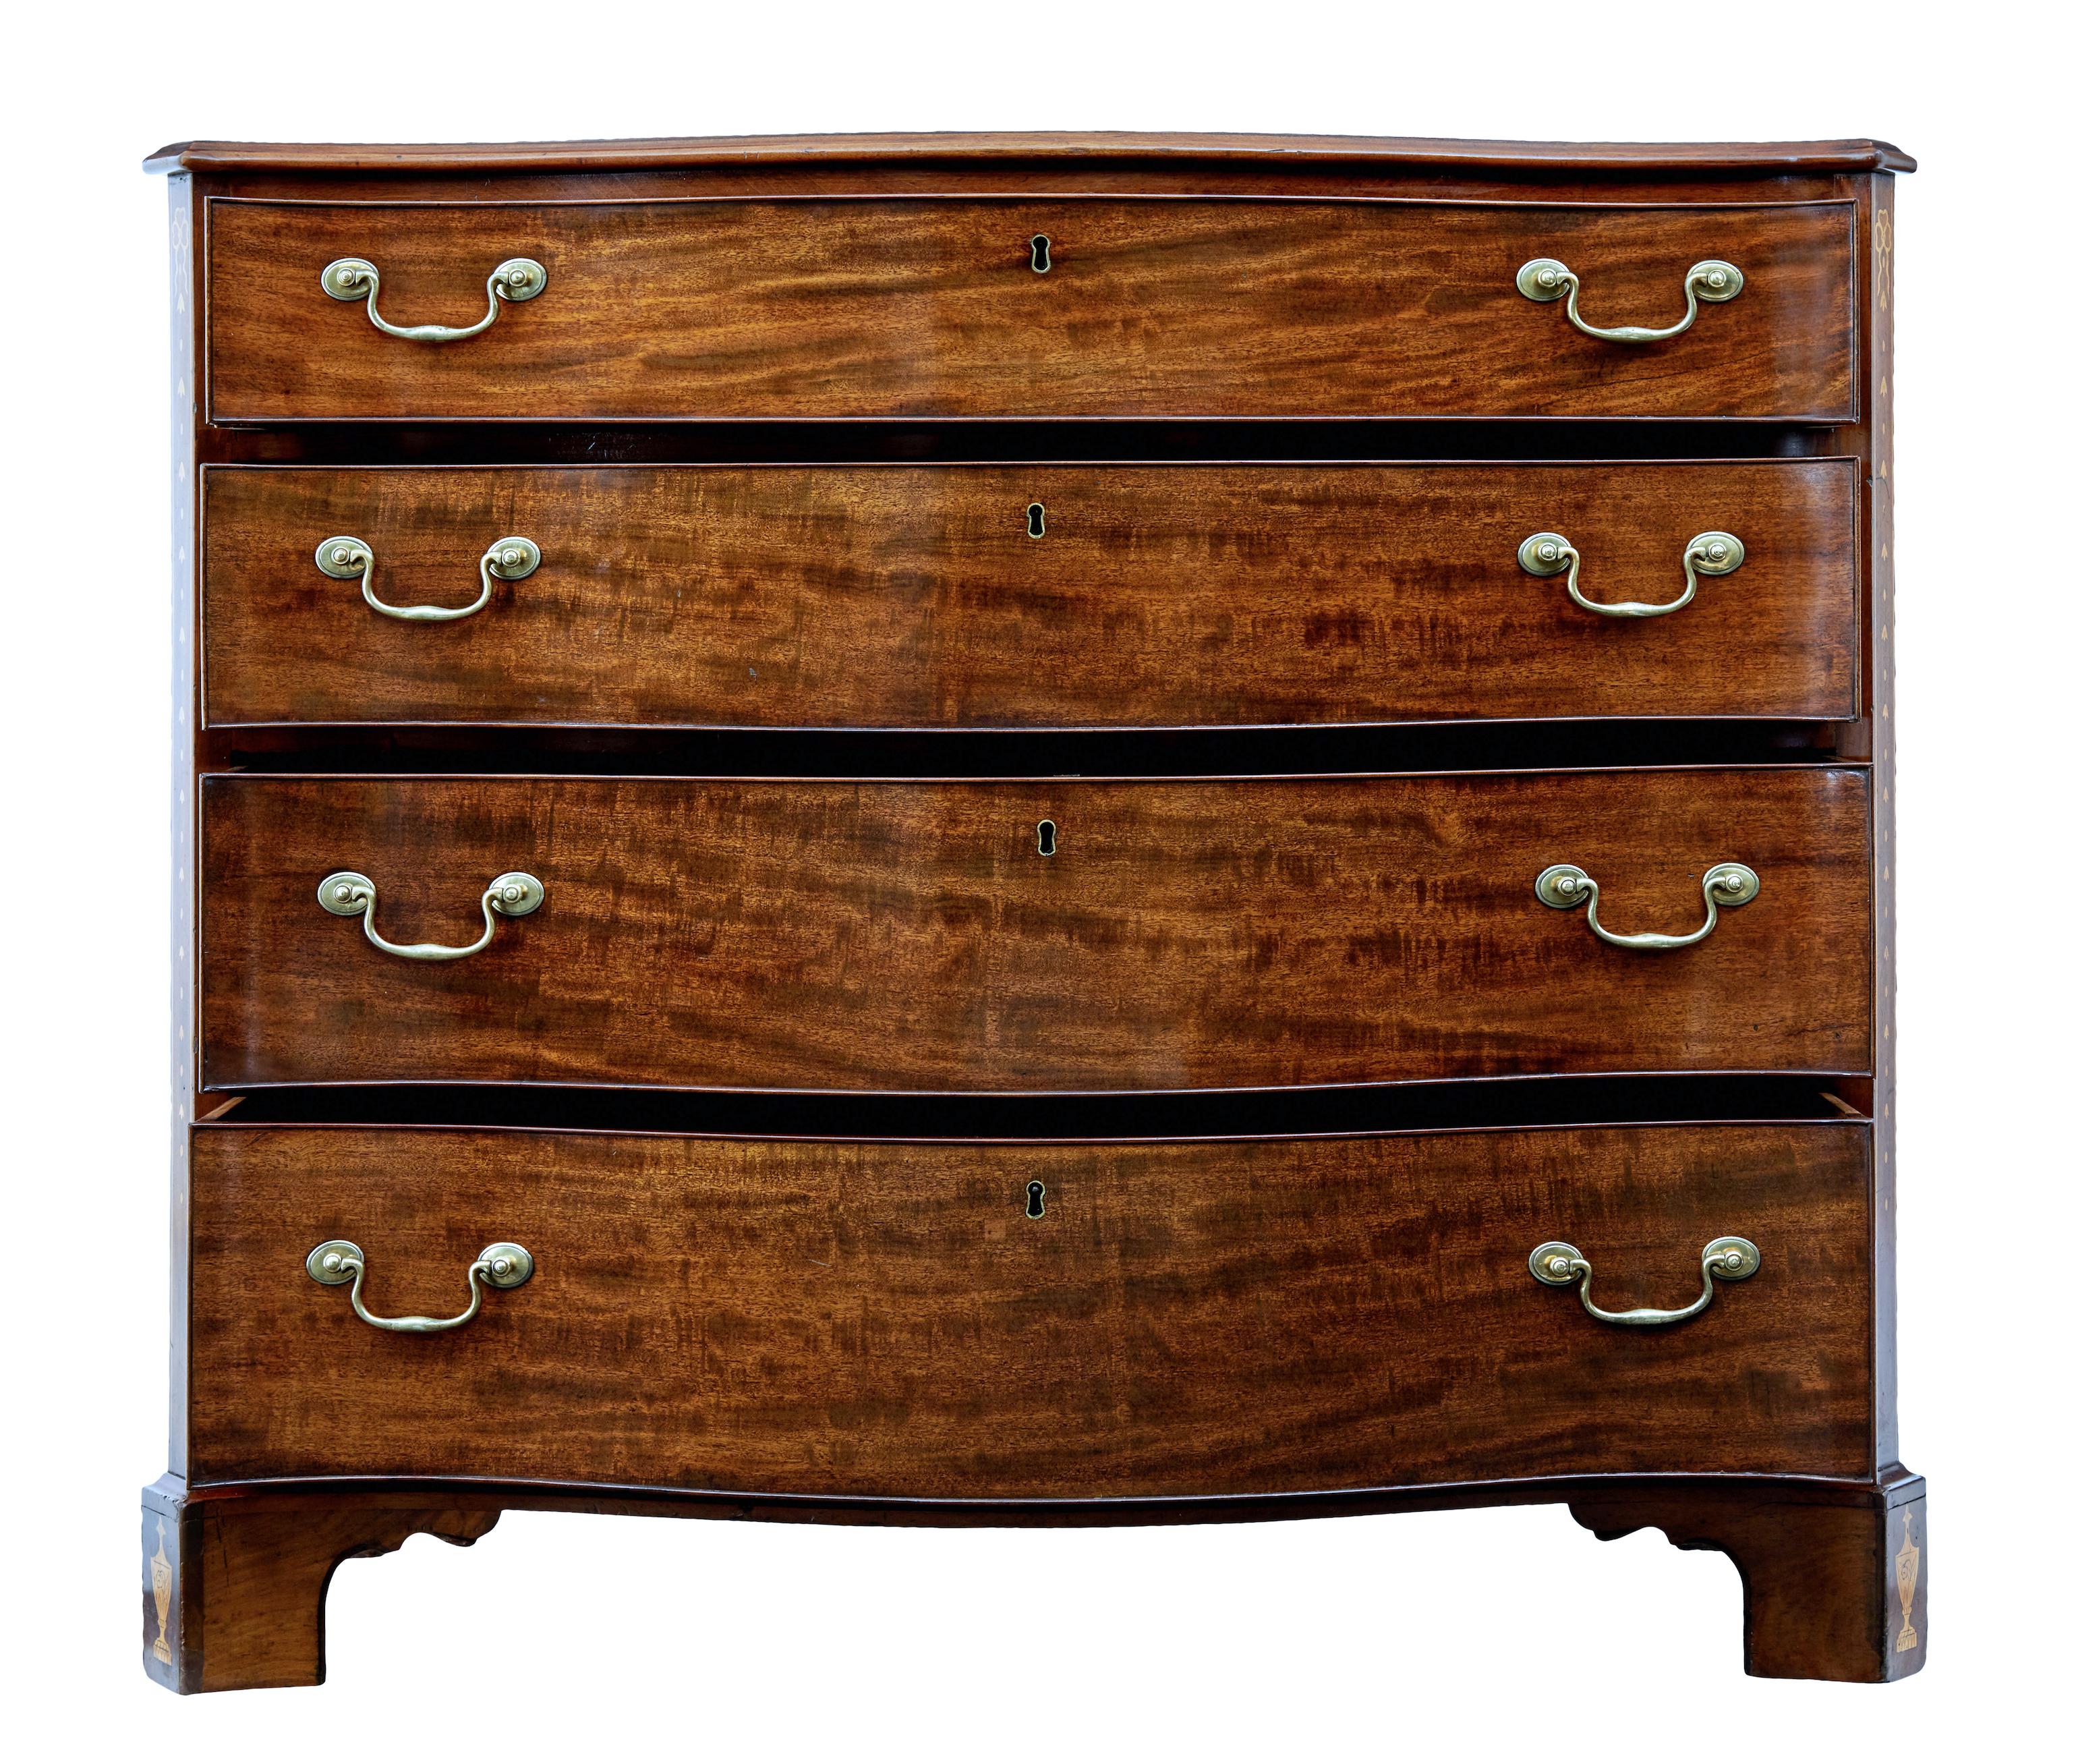 Fine quality serpentine chest of drawers with inlay, circa 1850.

Elegant piece of design with this rich mahogany chest of drawers. Serpentine front and shaped top surface. Canted corners with satinwood inlay design with stringing. Further inlaid